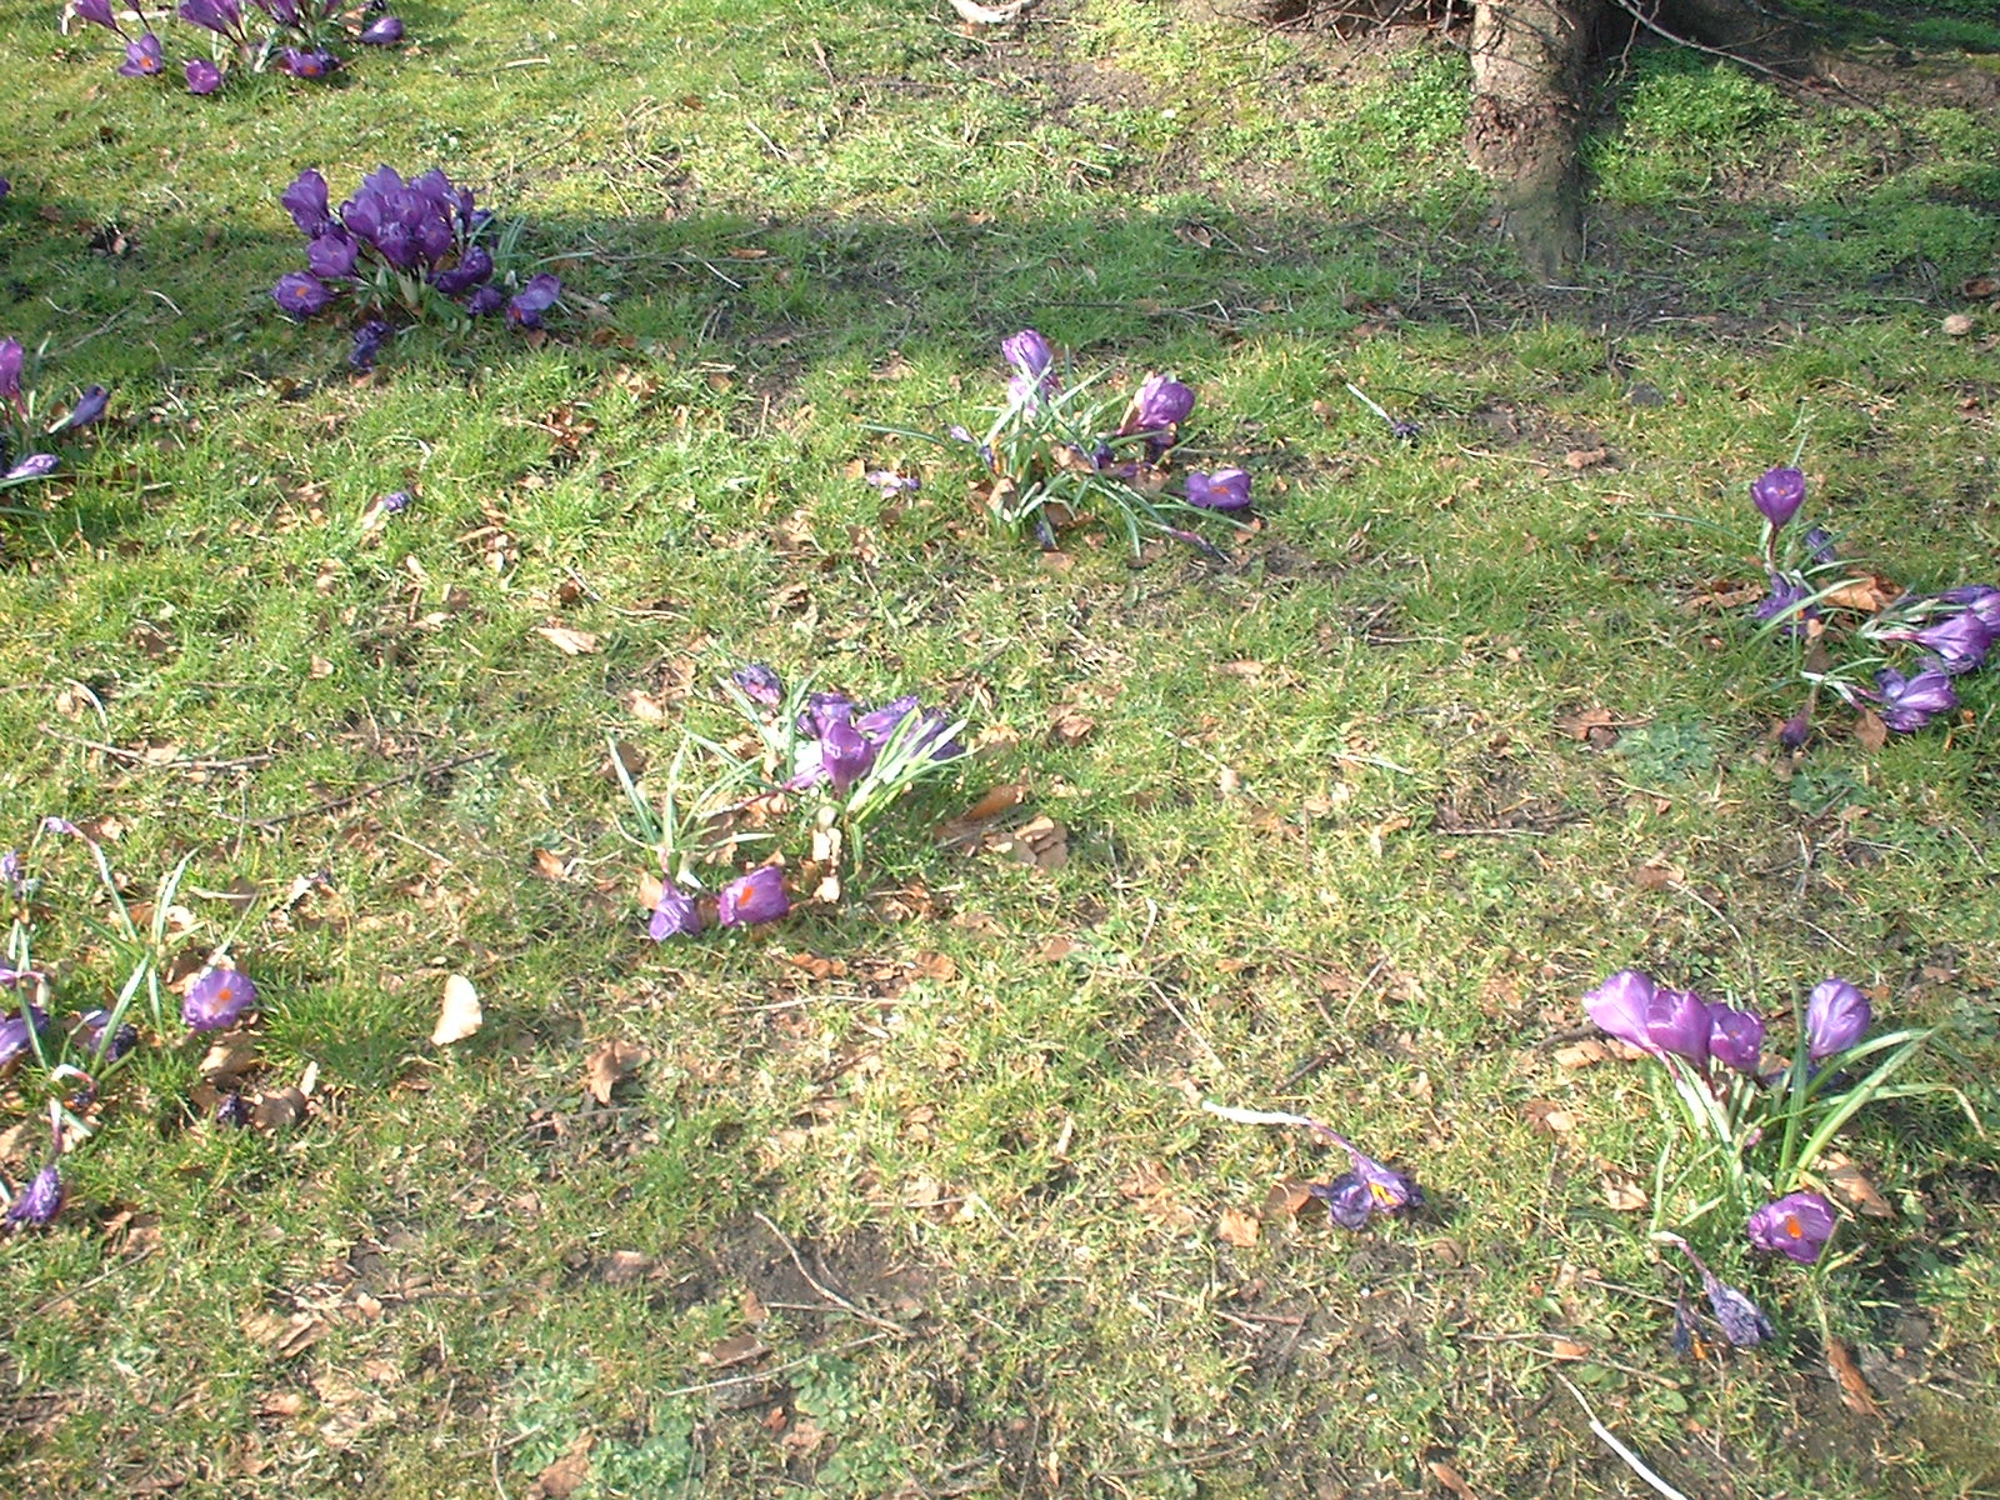 many purple flowers growing in the grass